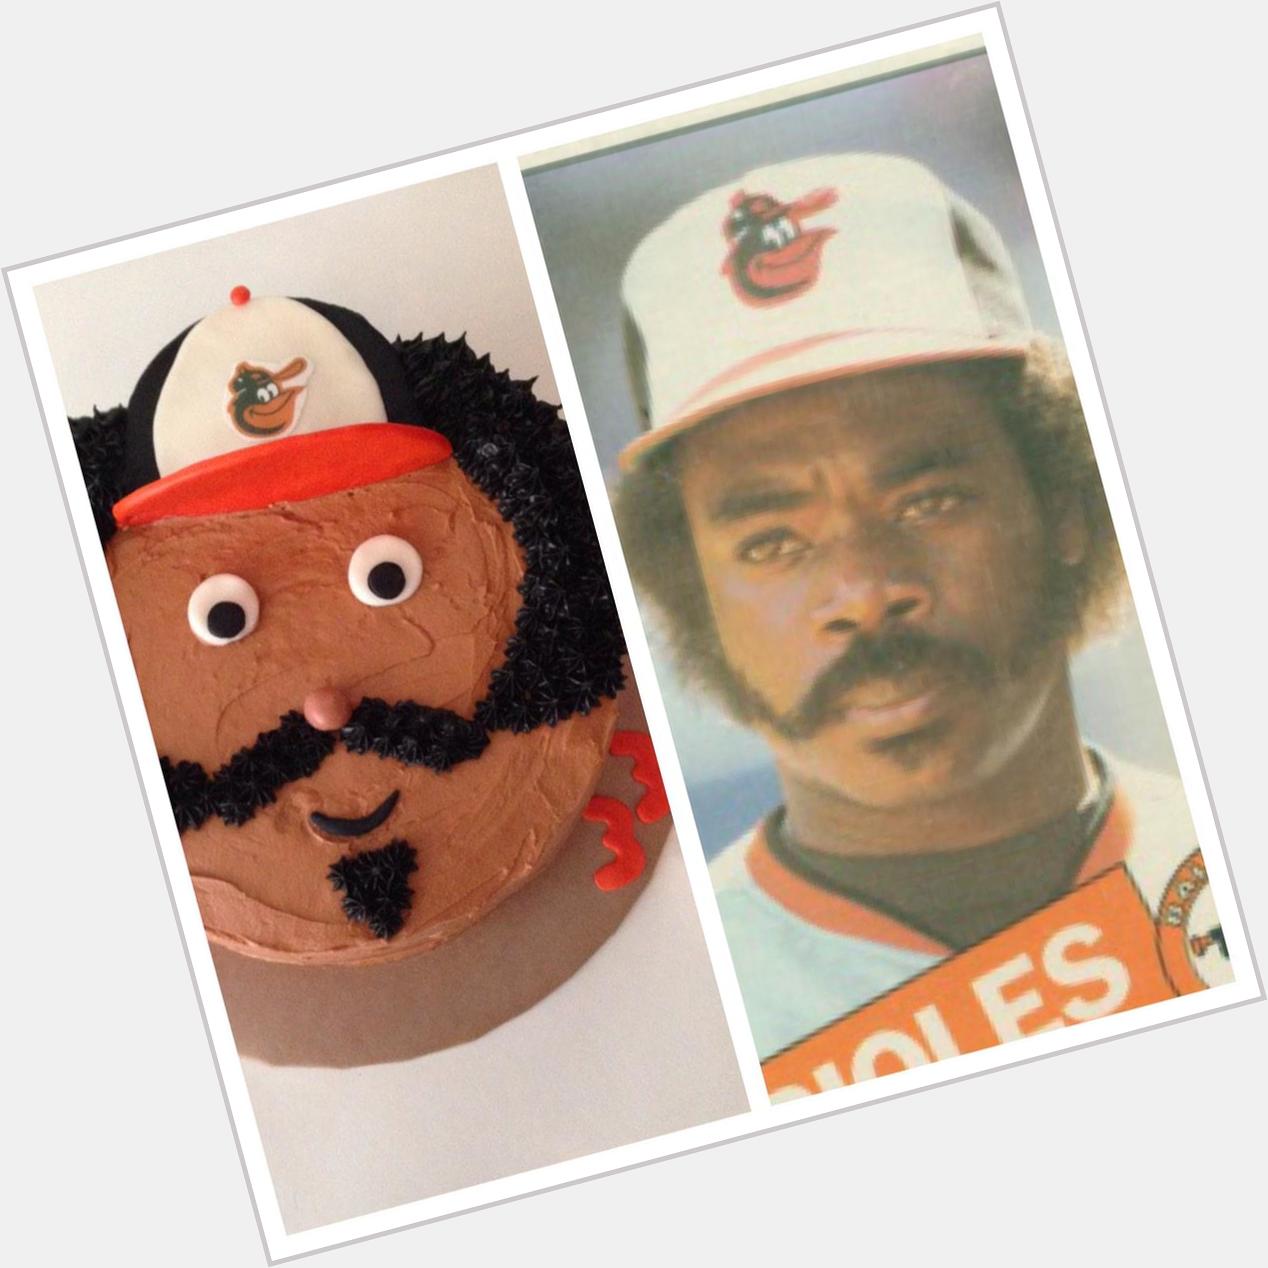 Happy 59th to great Eddie Murray! Here he is in birthday cake form.  